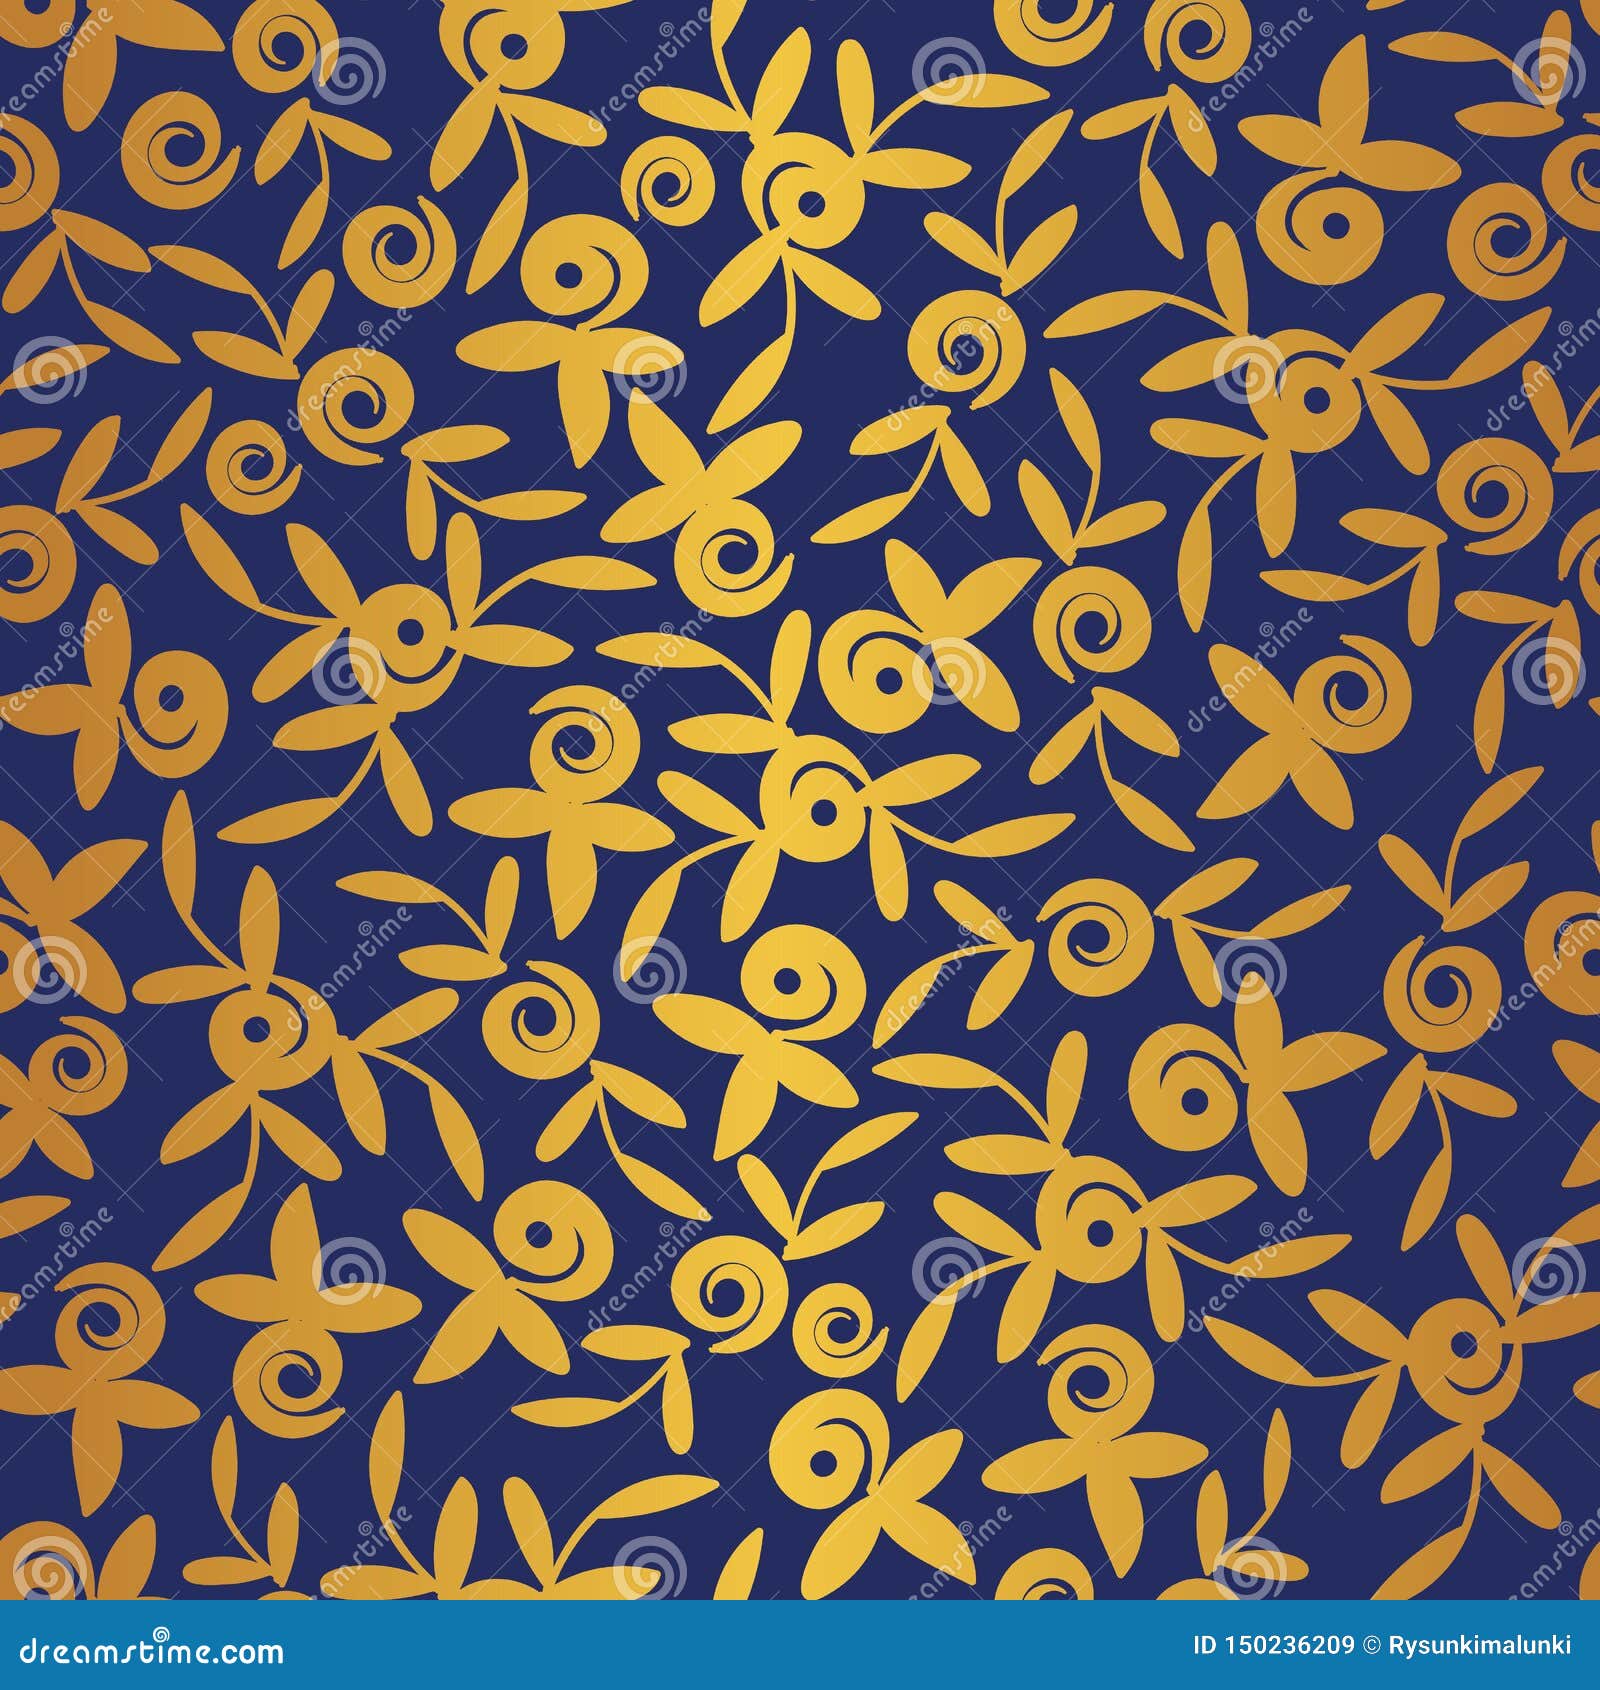 Seamless Vector Pattern With Gold Roses On Royal Blue Background Stock ...